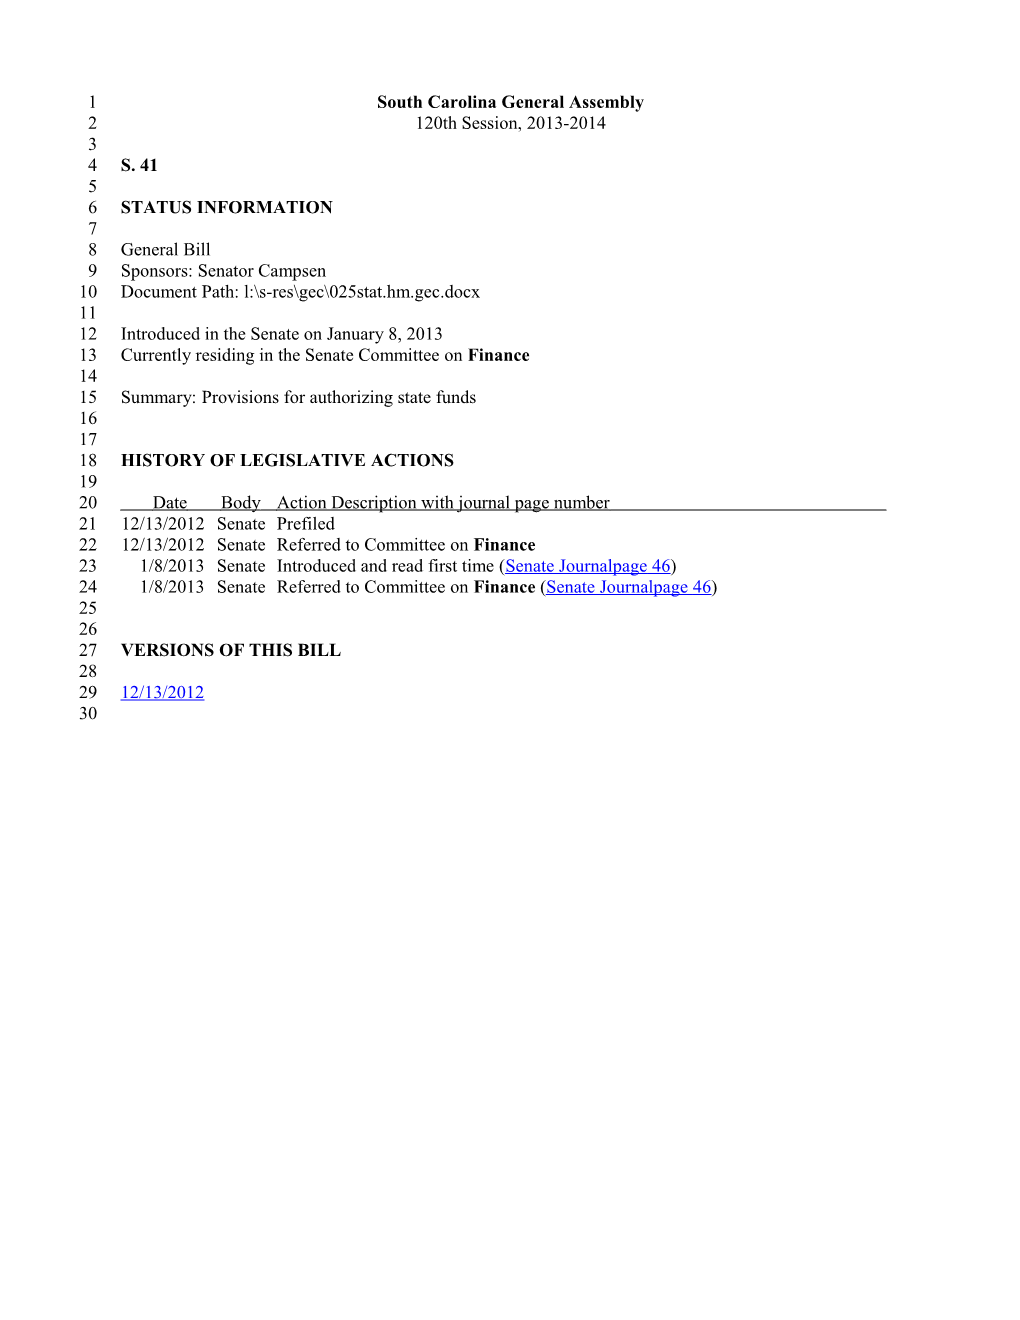 2013-2014 Bill 41: Provisions for Authorizing State Funds - South Carolina Legislature Online